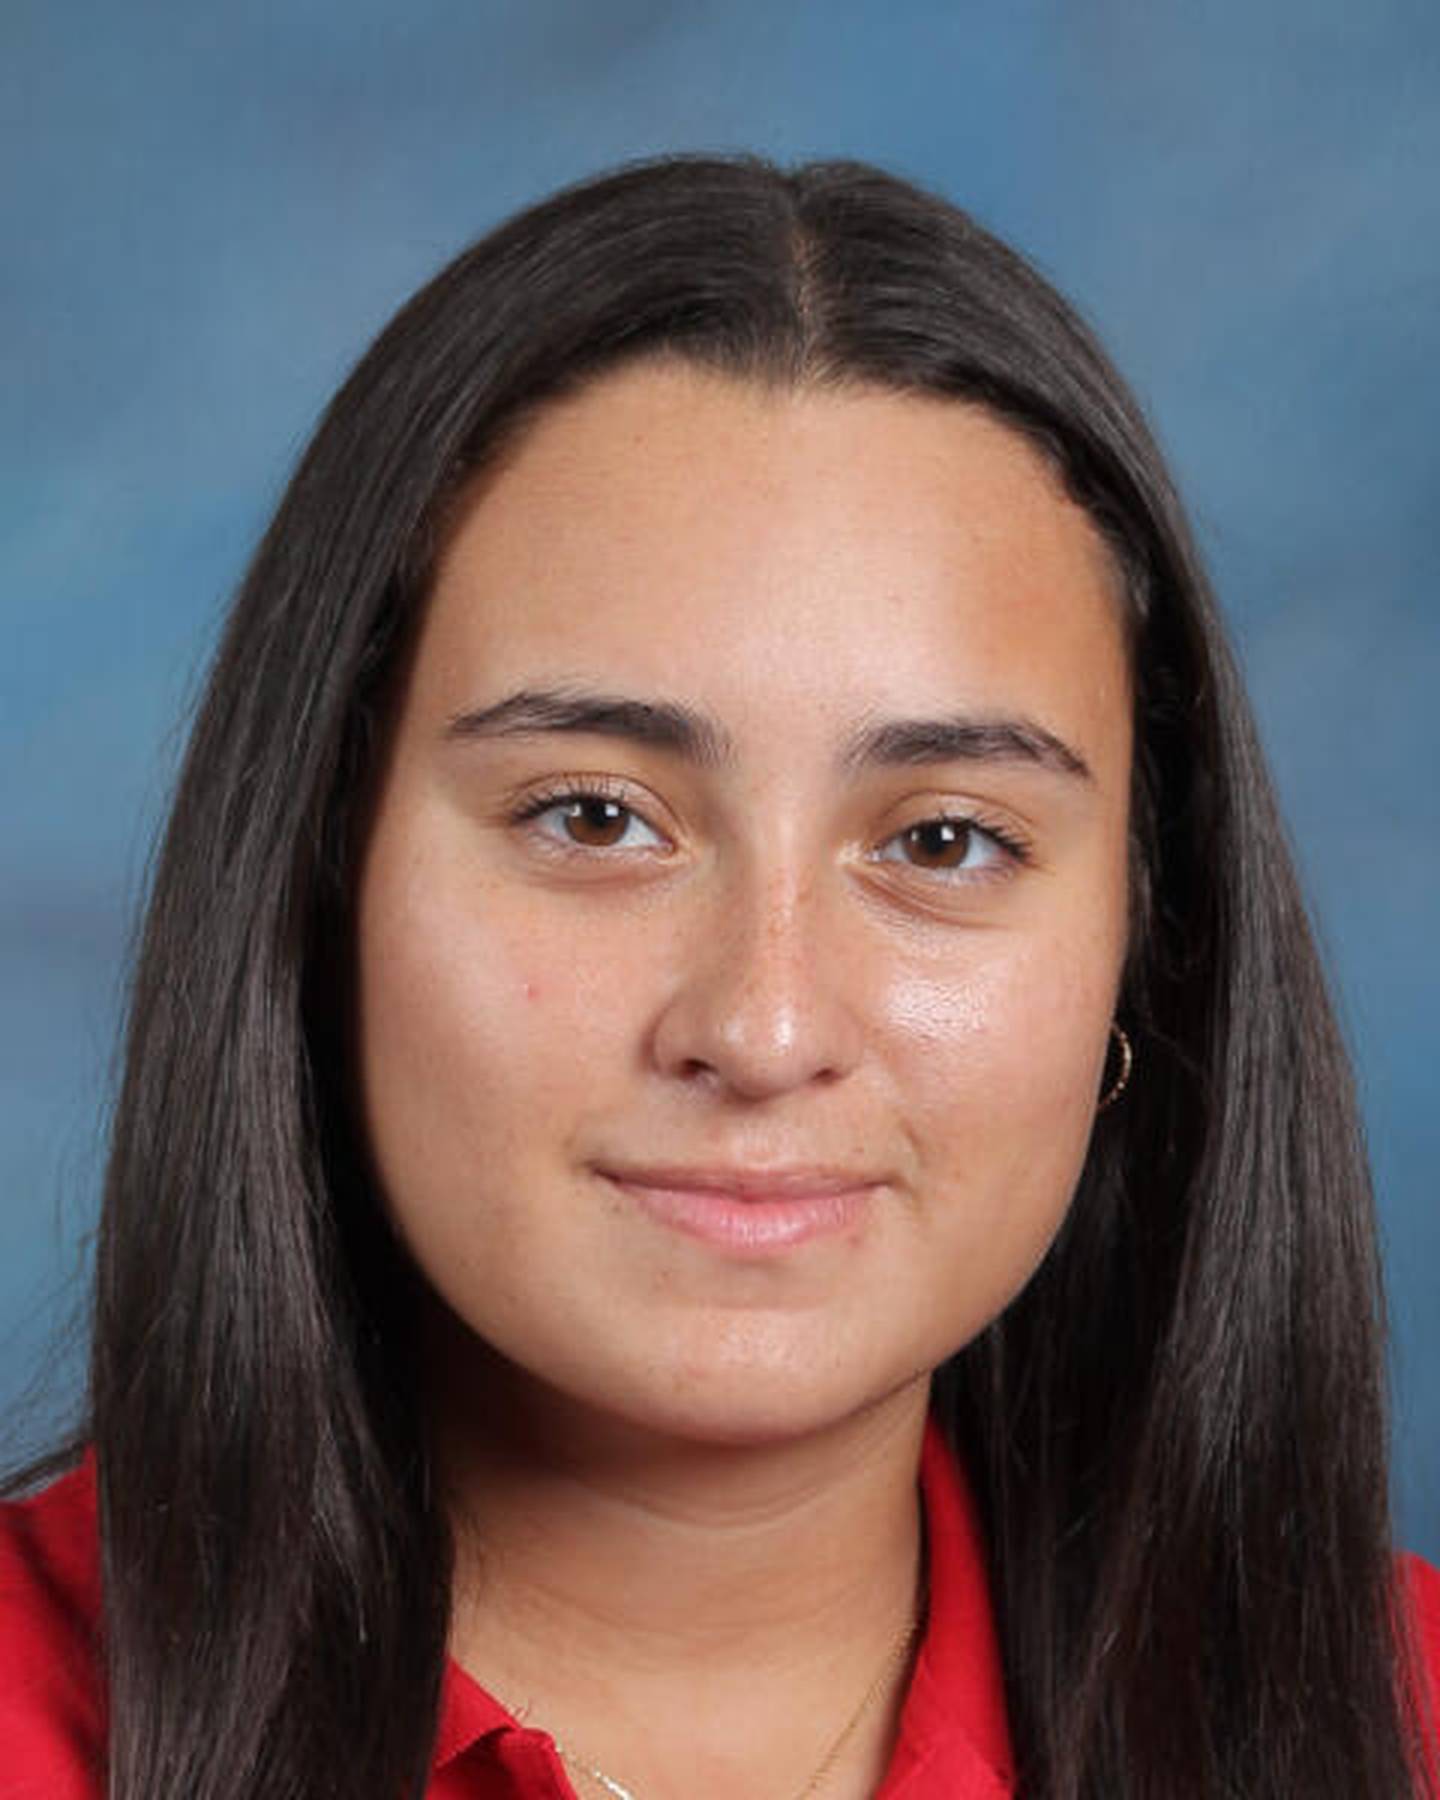 Joliet Catholic Academy named Emy Diaz as a Student of the Month for October 2021.